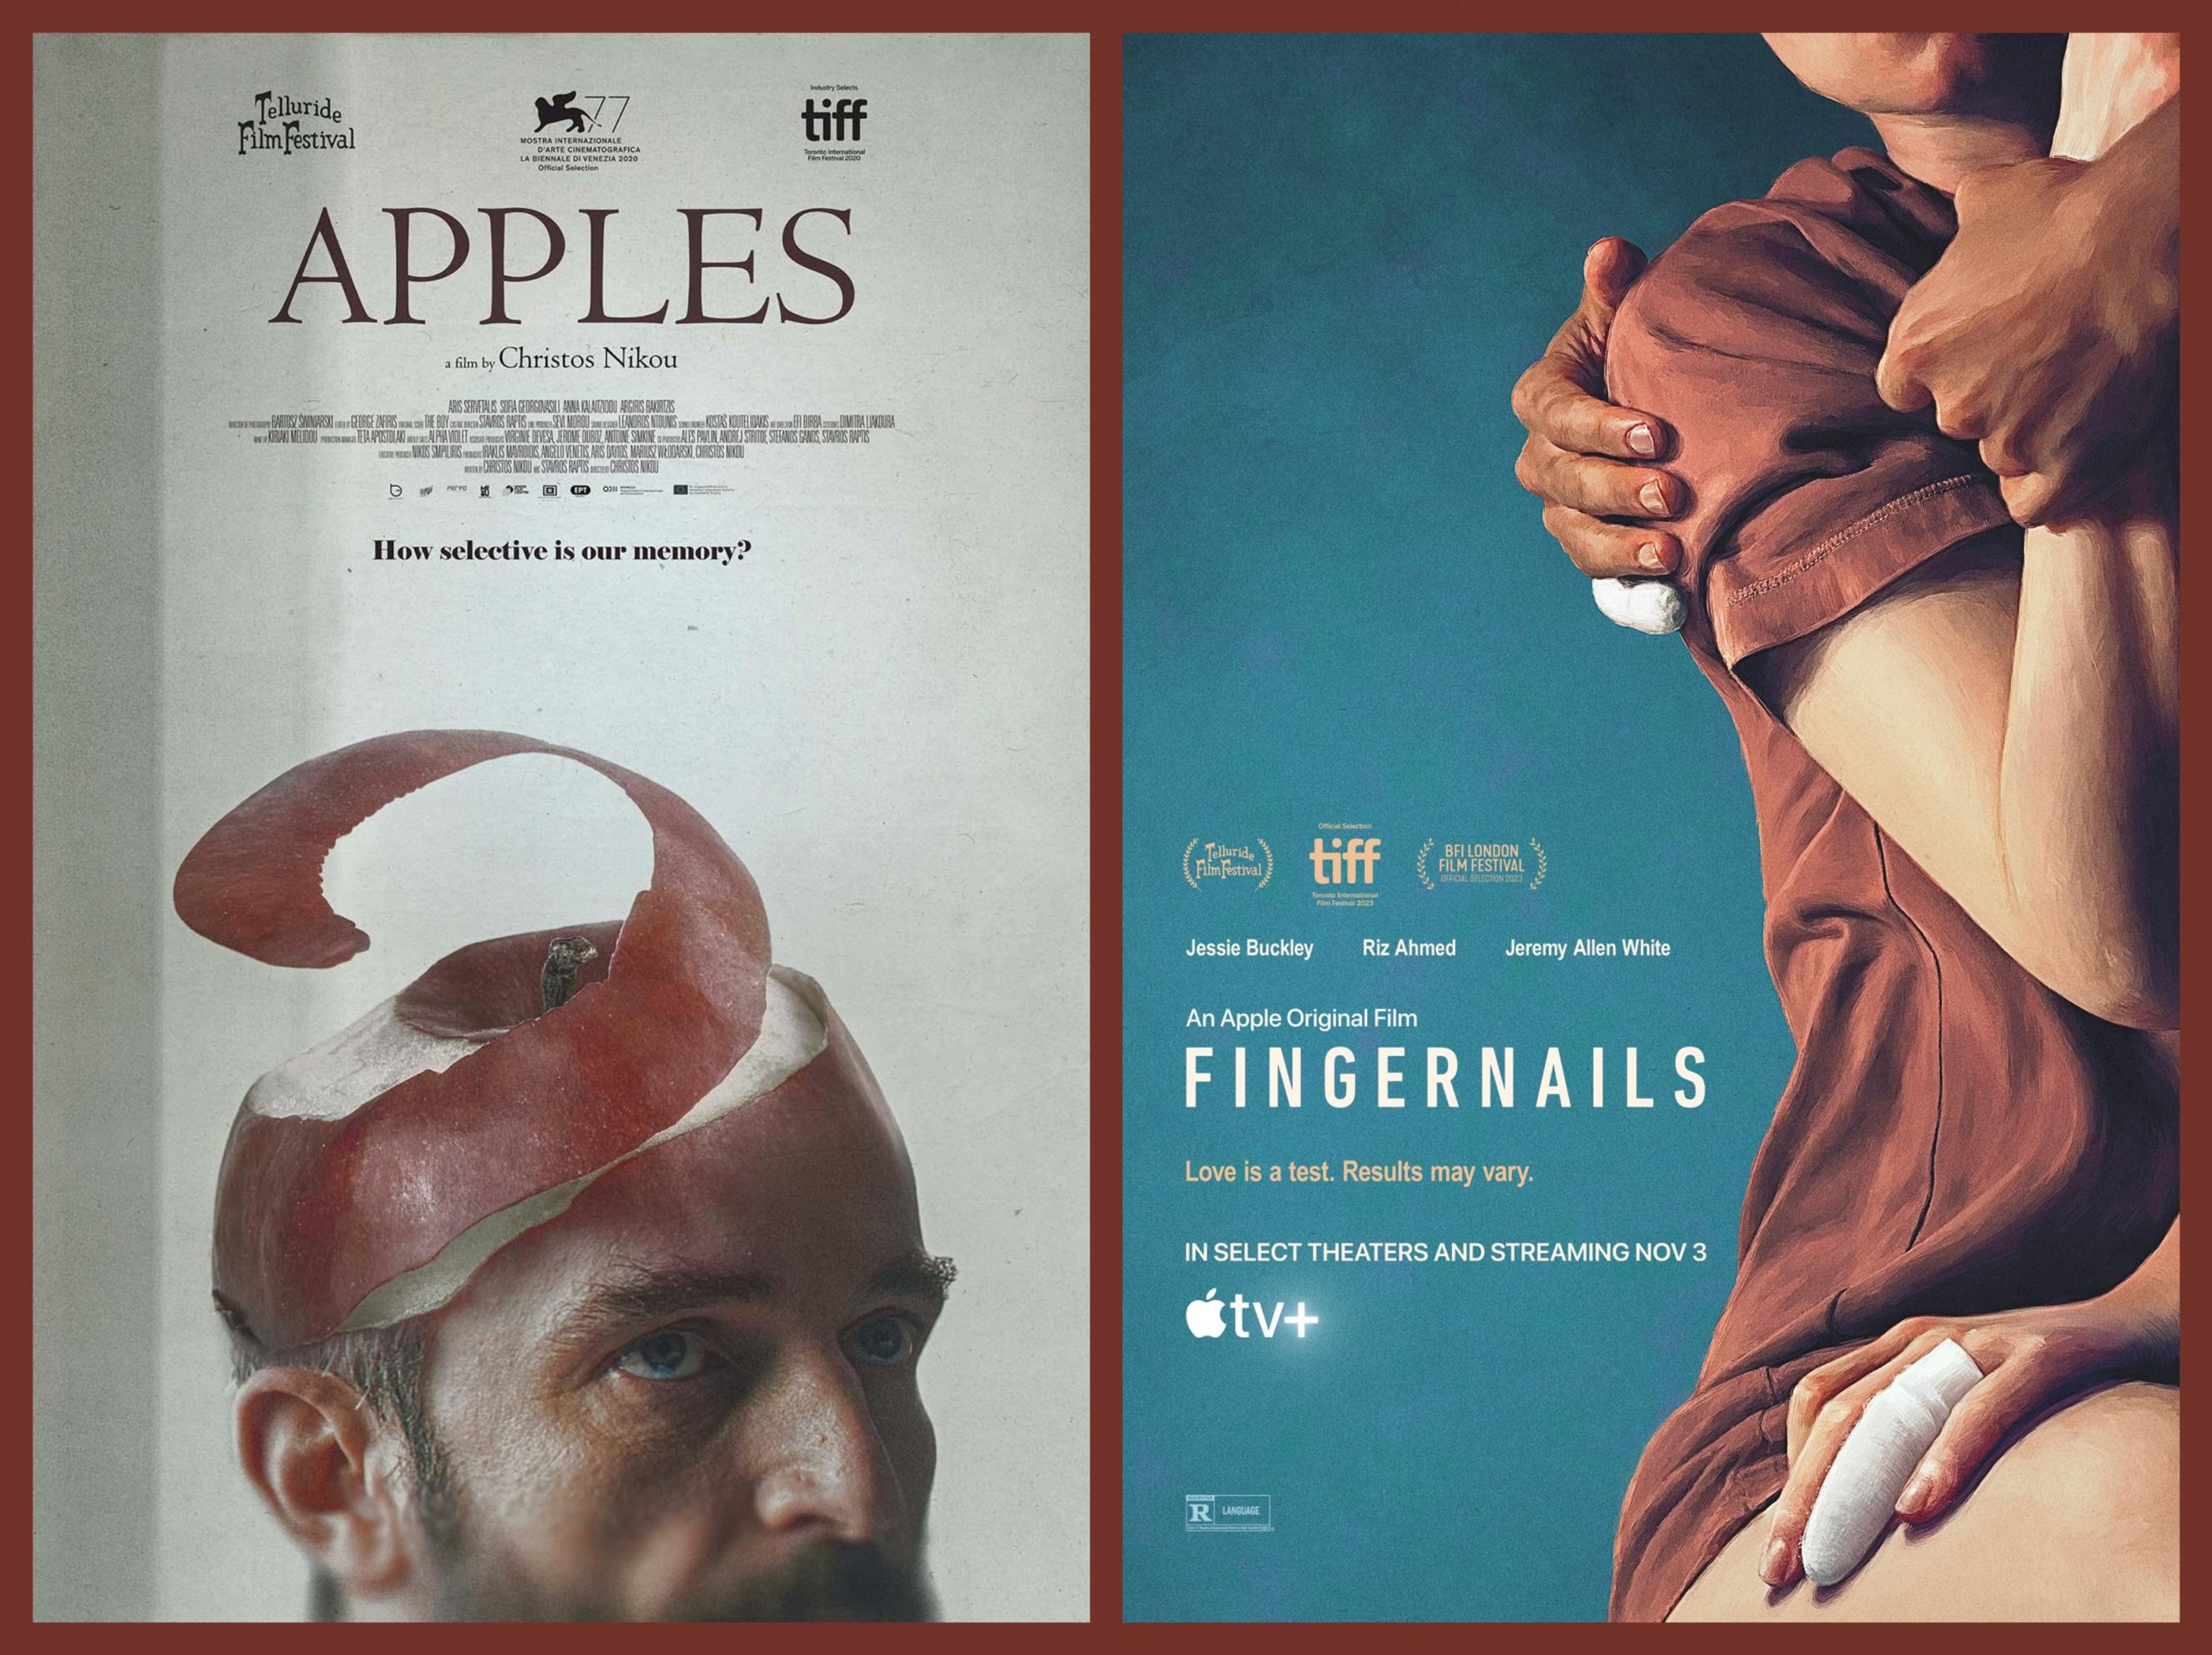 Apple’s Gimmick: On “Fingernails” and the TV+ Brand